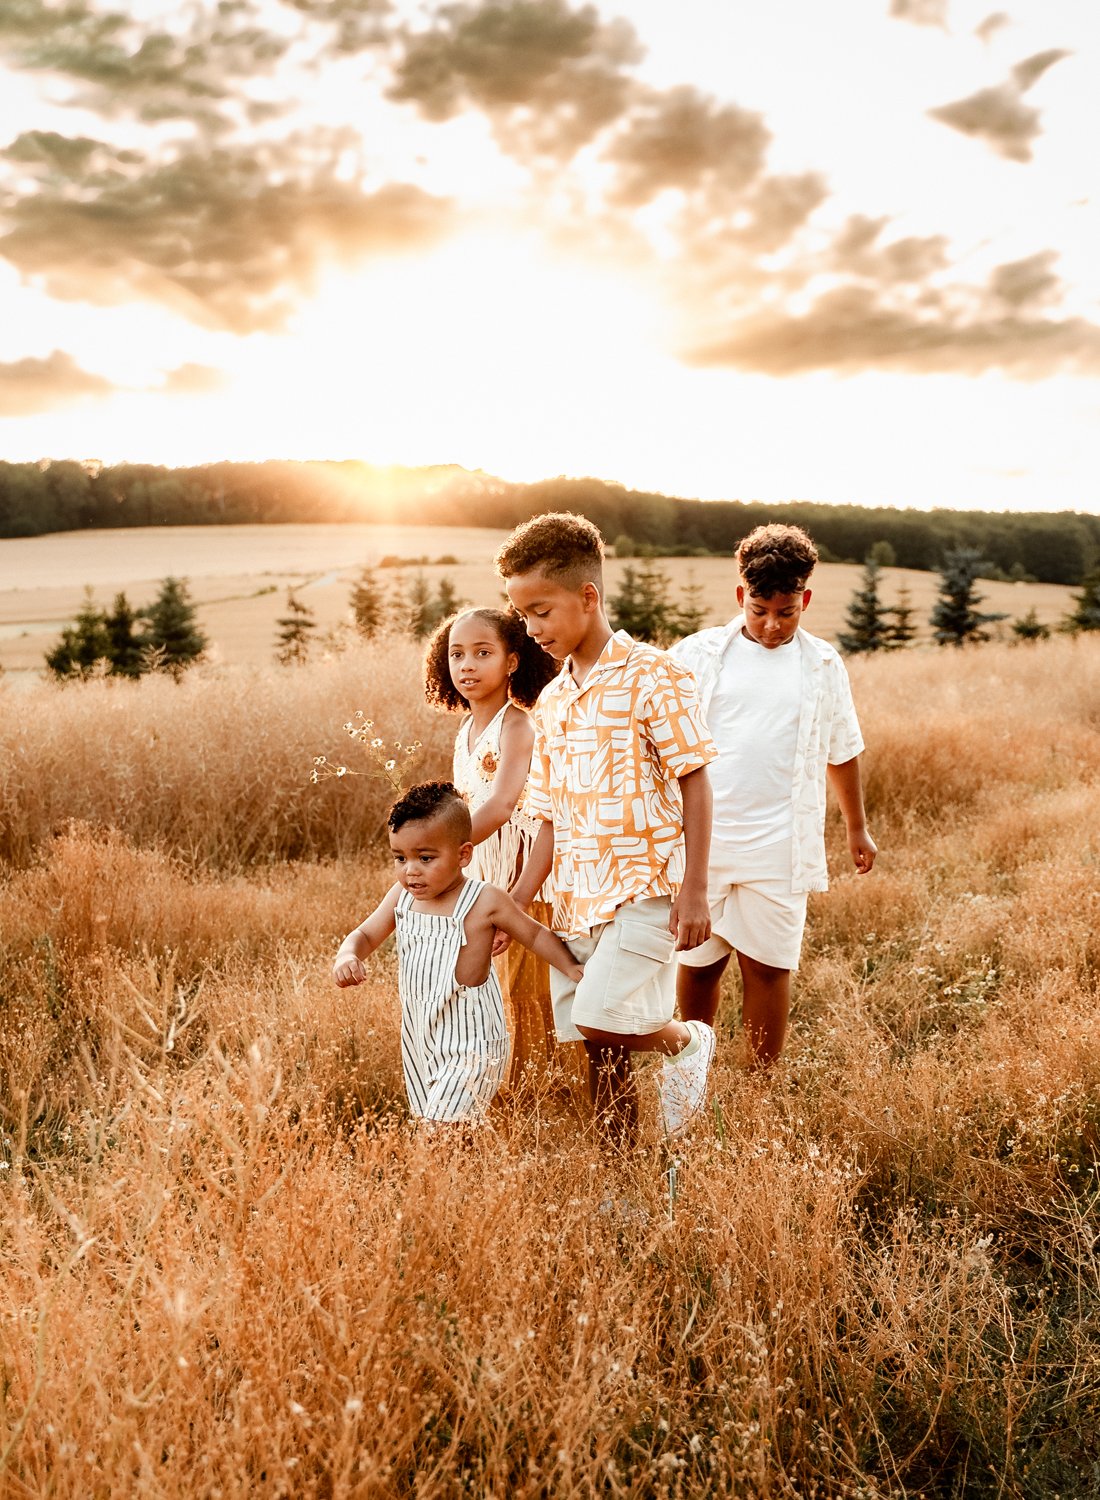 emotive-storytelling-summer-session-of-young-mixed-family-with-young-kids-at-sunset-in-german-country-side-in-ramstein-kmc-by-sarah-havens (4).jpg